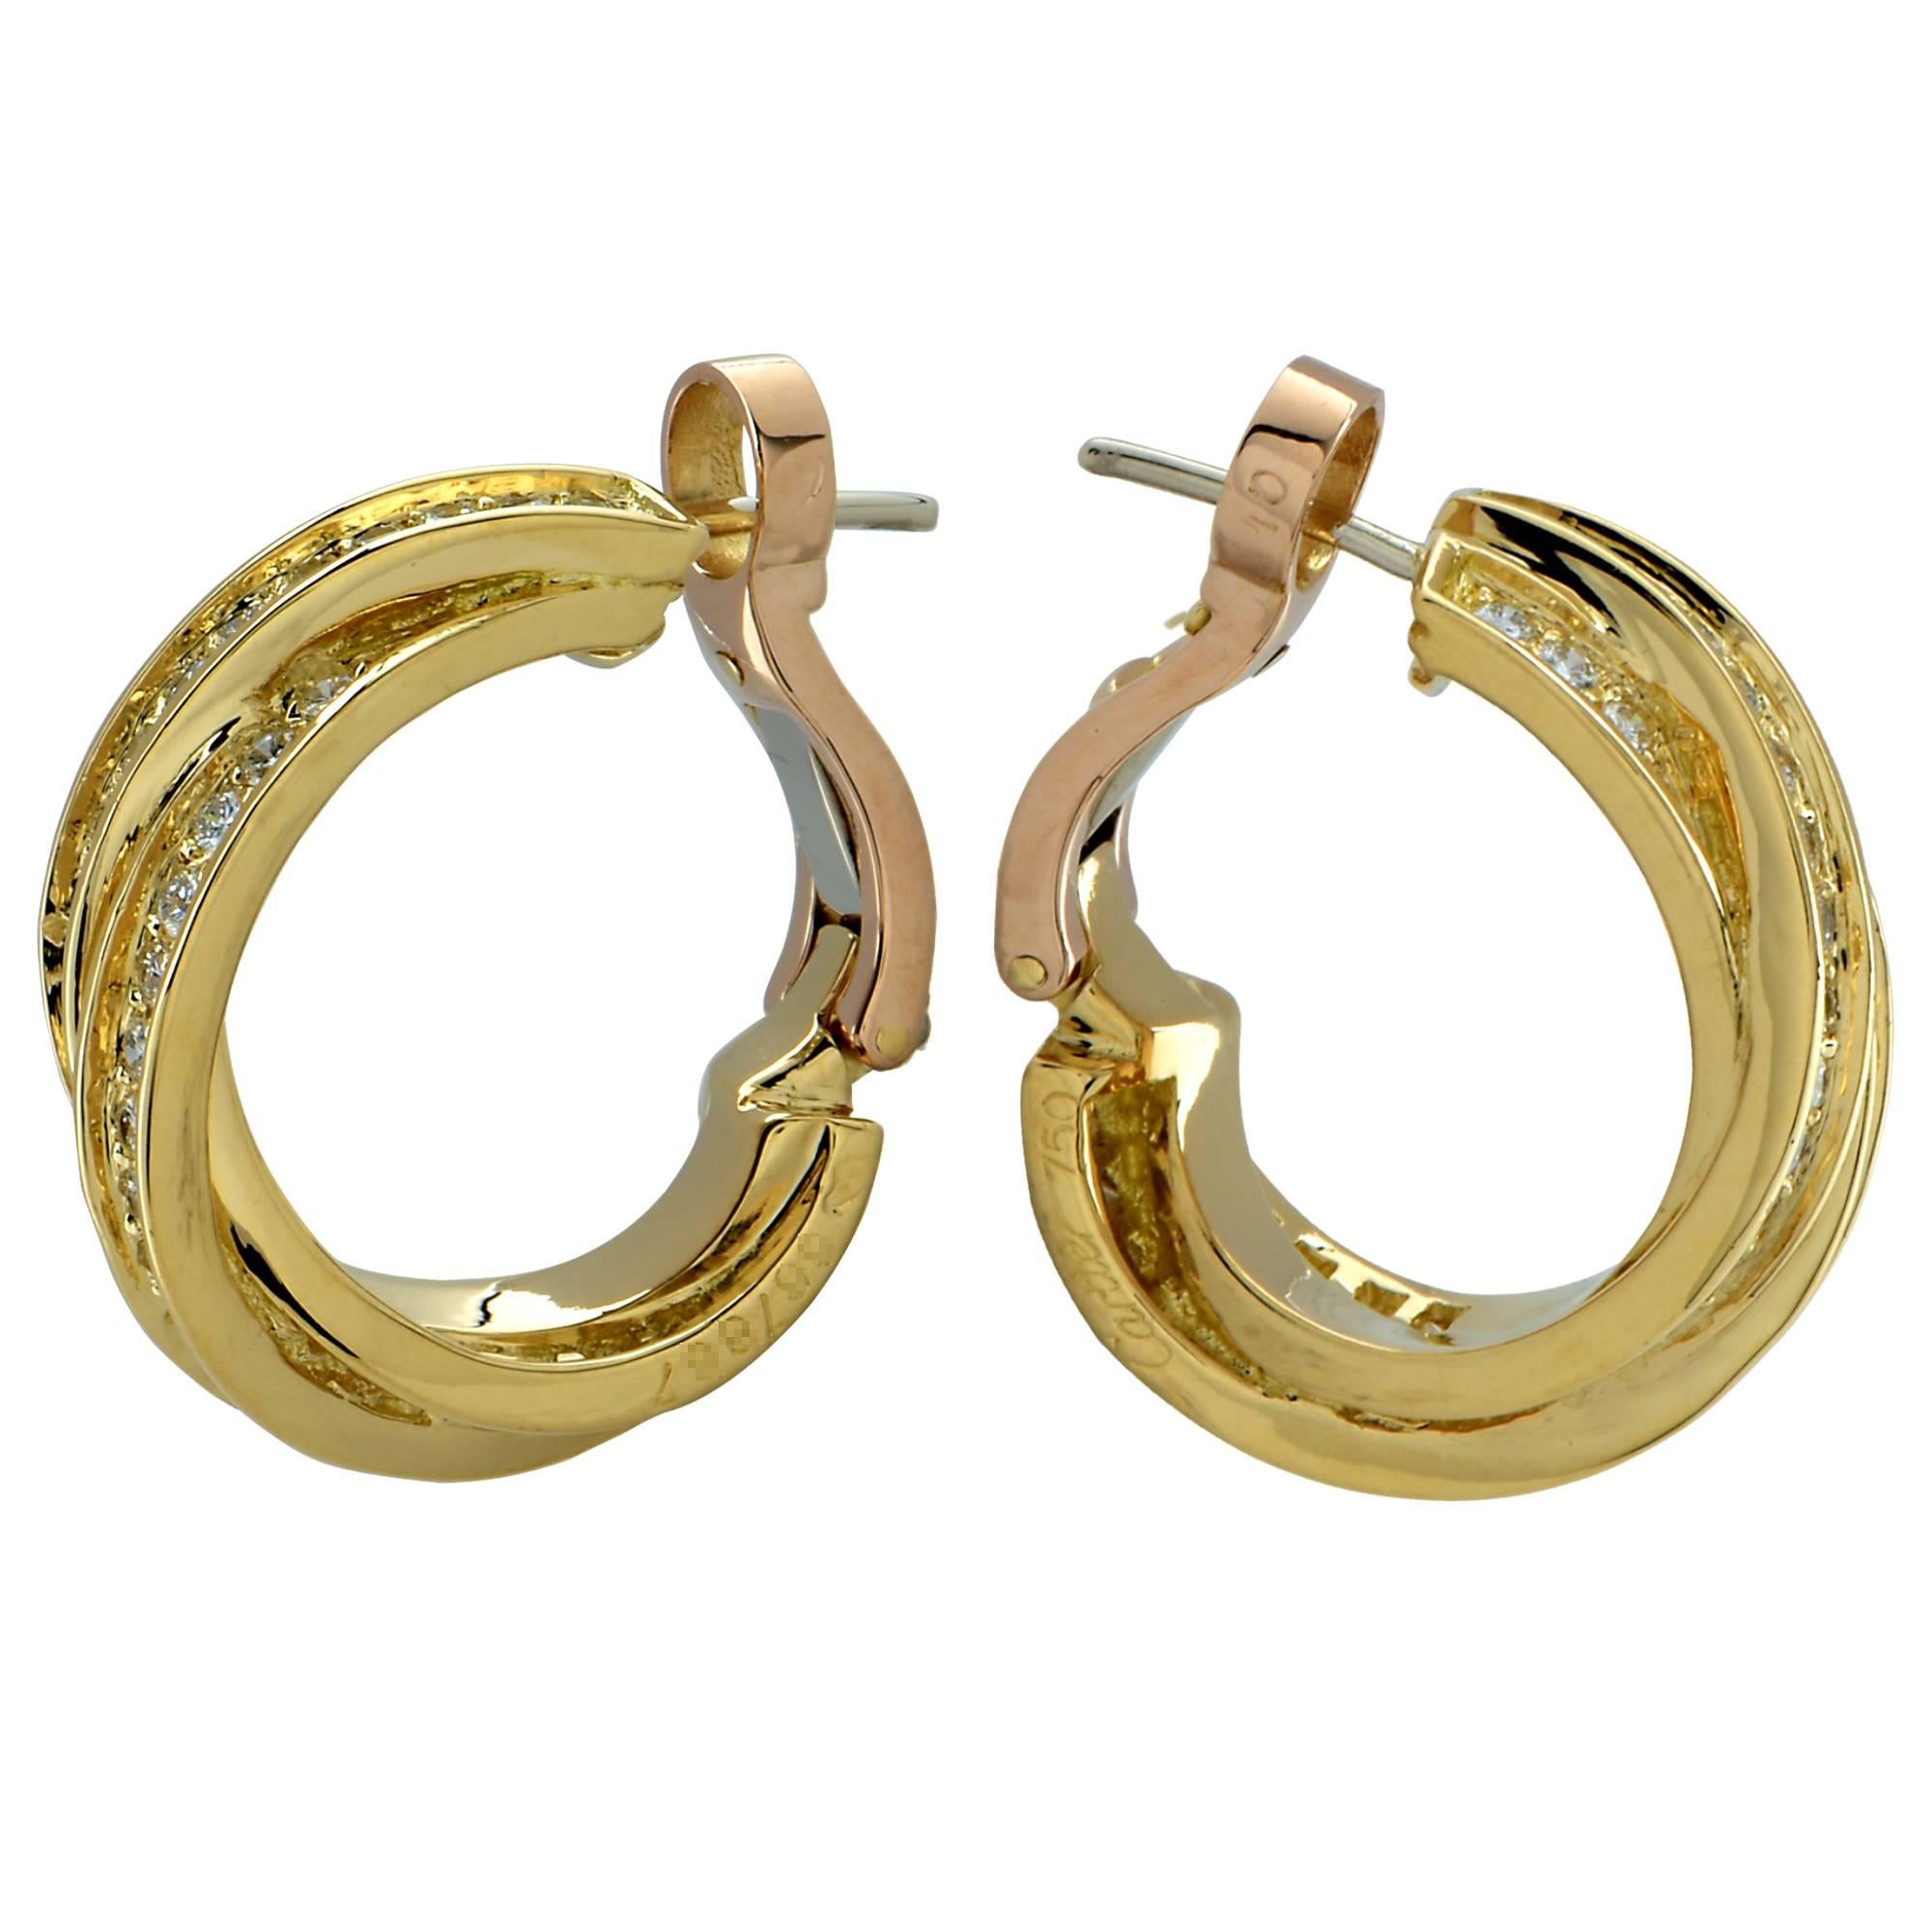 Classic Cartier 18k yellow gold and diamond earrings from the trinity collection featuring interlocking yellow gold hoops embellished with 92 round brilliant cut diamonds totaling approximately 1.4cts total F Color, VVS VS Clarity.  These gorgeous